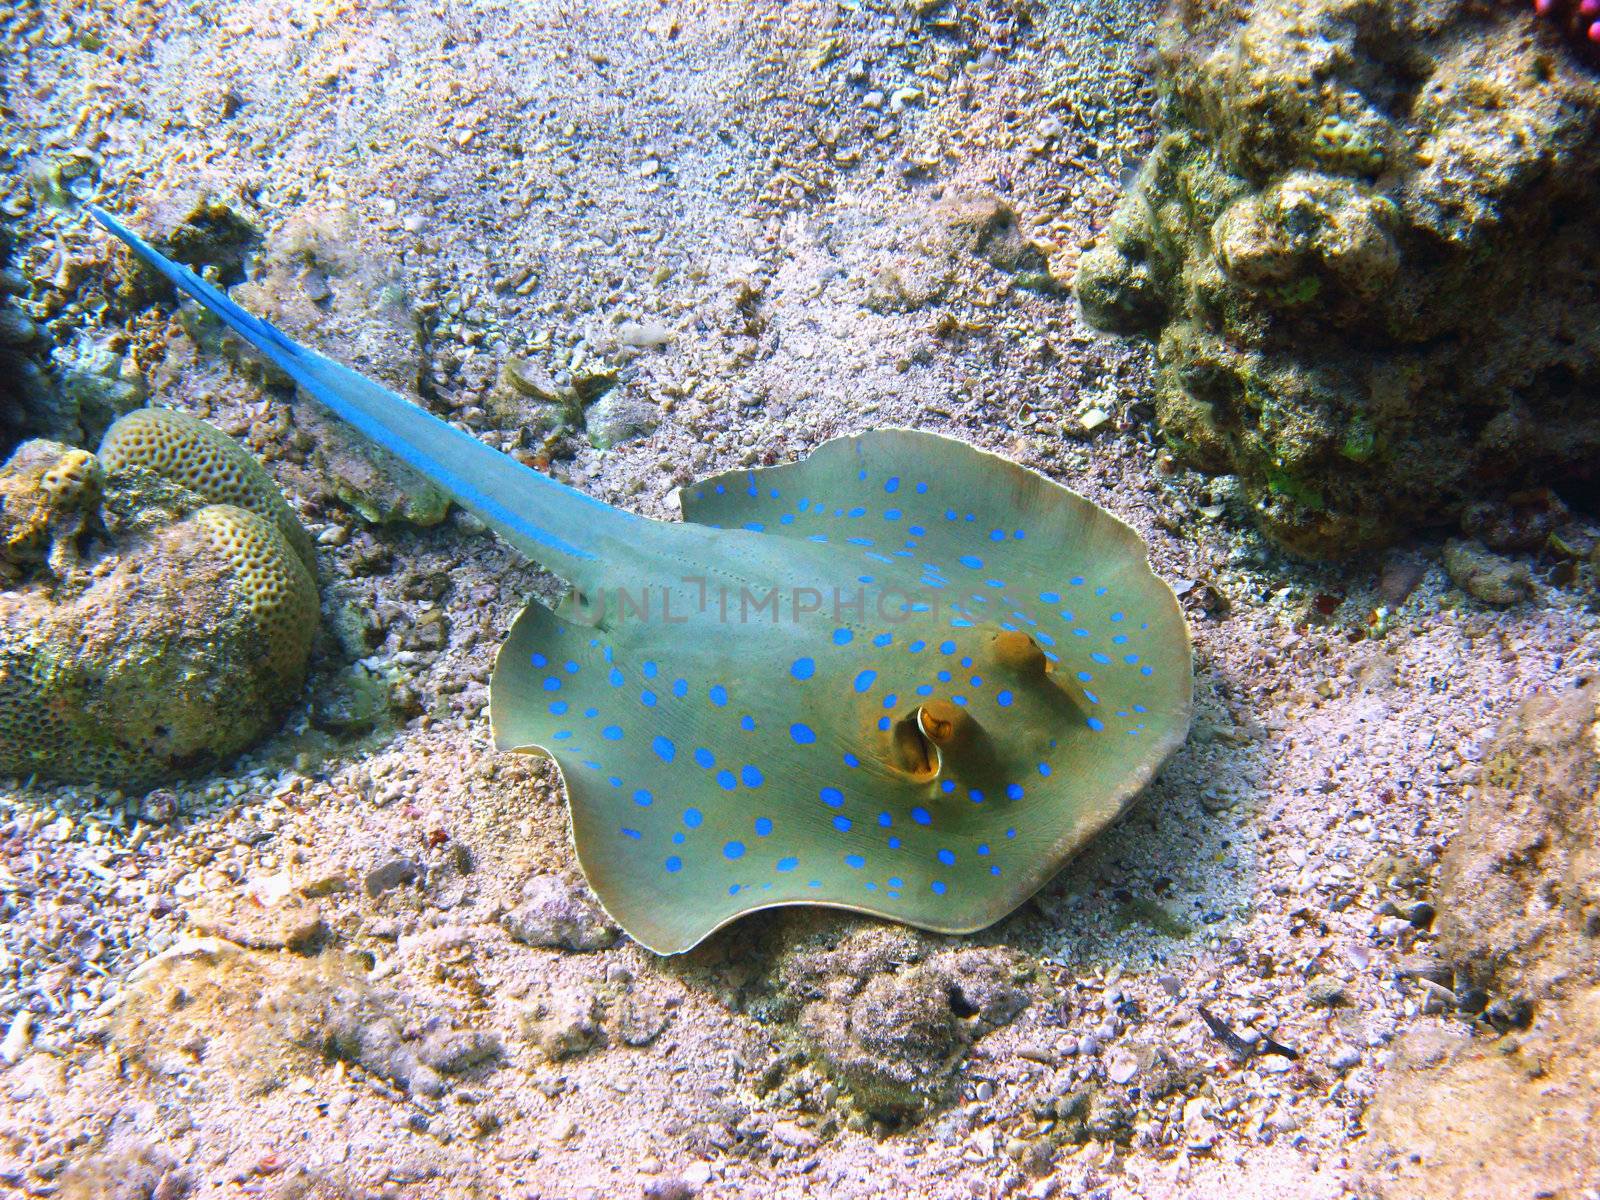 Blue-spotted stingray and coral by vintrom